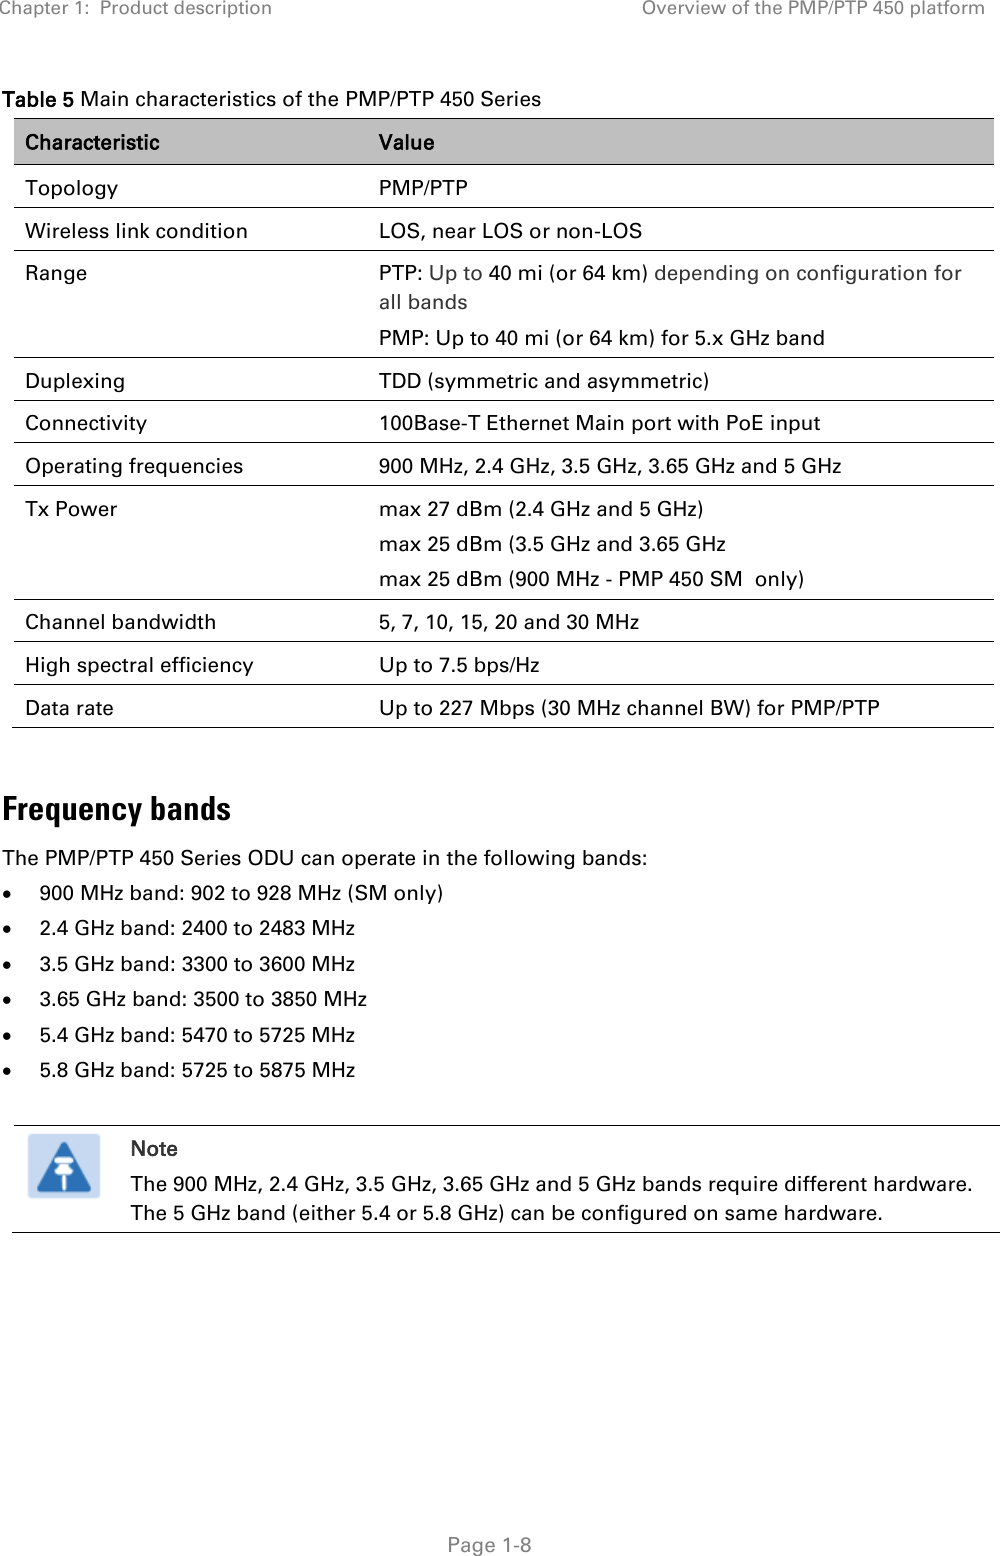 Chapter 1:  Product description Overview of the PMP/PTP 450 platform   Page 1-8 Table 5 Main characteristics of the PMP/PTP 450 Series Characteristic Value Topology PMP/PTP Wireless link condition LOS, near LOS or non-LOS Range PTP: Up to 40 mi (or 64 km) depending on configuration for all bands PMP: Up to 40 mi (or 64 km) for 5.x GHz band Duplexing TDD (symmetric and asymmetric) Connectivity 100Base-T Ethernet Main port with PoE input Operating frequencies 900 MHz, 2.4 GHz, 3.5 GHz, 3.65 GHz and 5 GHz Tx Power max 27 dBm (2.4 GHz and 5 GHz) max 25 dBm (3.5 GHz and 3.65 GHz max 25 dBm (900 MHz - PMP 450 SM  only) Channel bandwidth 5, 7, 10, 15, 20 and 30 MHz High spectral efficiency Up to 7.5 bps/Hz Data rate Up to 227 Mbps (30 MHz channel BW) for PMP/PTP  Frequency bands The PMP/PTP 450 Series ODU can operate in the following bands:  900 MHz band: 902 to 928 MHz (SM only)  2.4 GHz band: 2400 to 2483 MHz  3.5 GHz band: 3300 to 3600 MHz  3.65 GHz band: 3500 to 3850 MHz  5.4 GHz band: 5470 to 5725 MHz  5.8 GHz band: 5725 to 5875 MHz   Note The 900 MHz, 2.4 GHz, 3.5 GHz, 3.65 GHz and 5 GHz bands require different hardware. The 5 GHz band (either 5.4 or 5.8 GHz) can be configured on same hardware.    